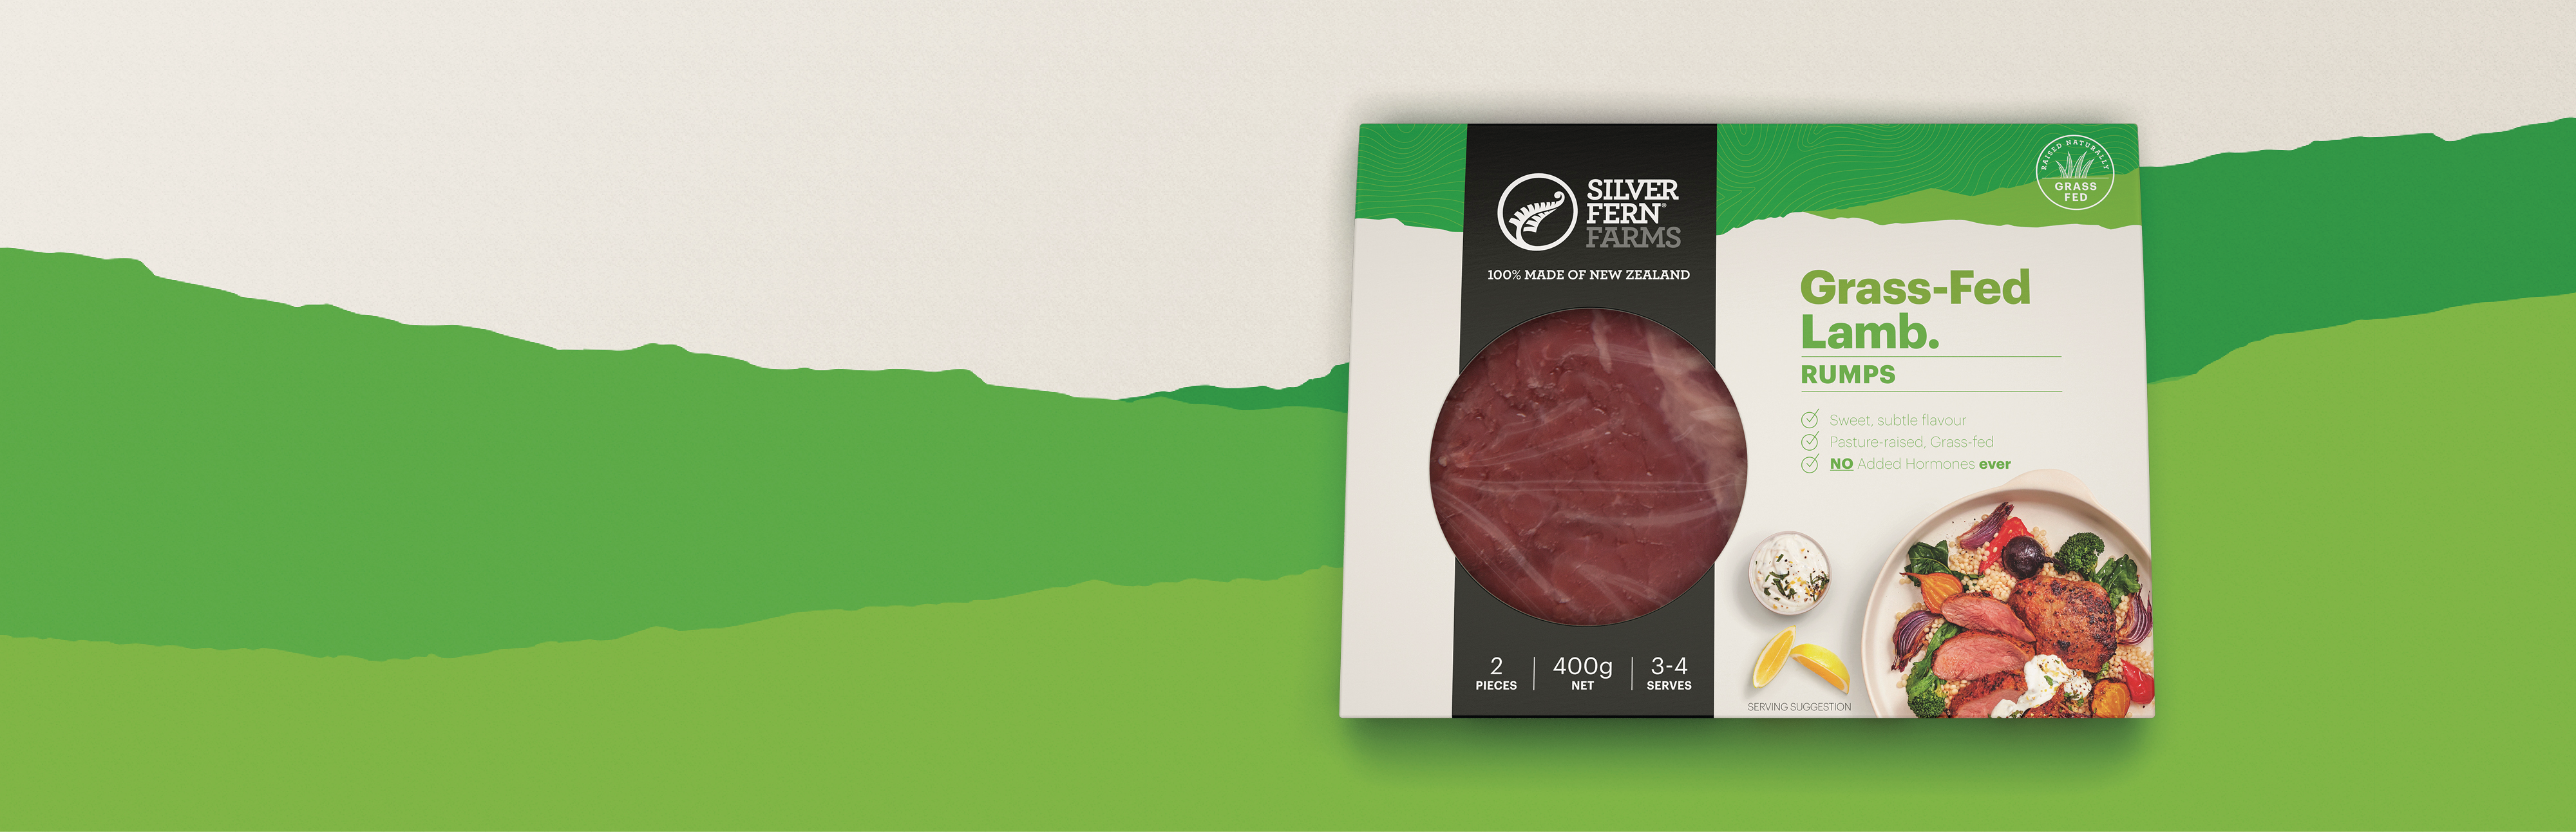 grass-fed lamb rump packaging on an illustrated background of green hills